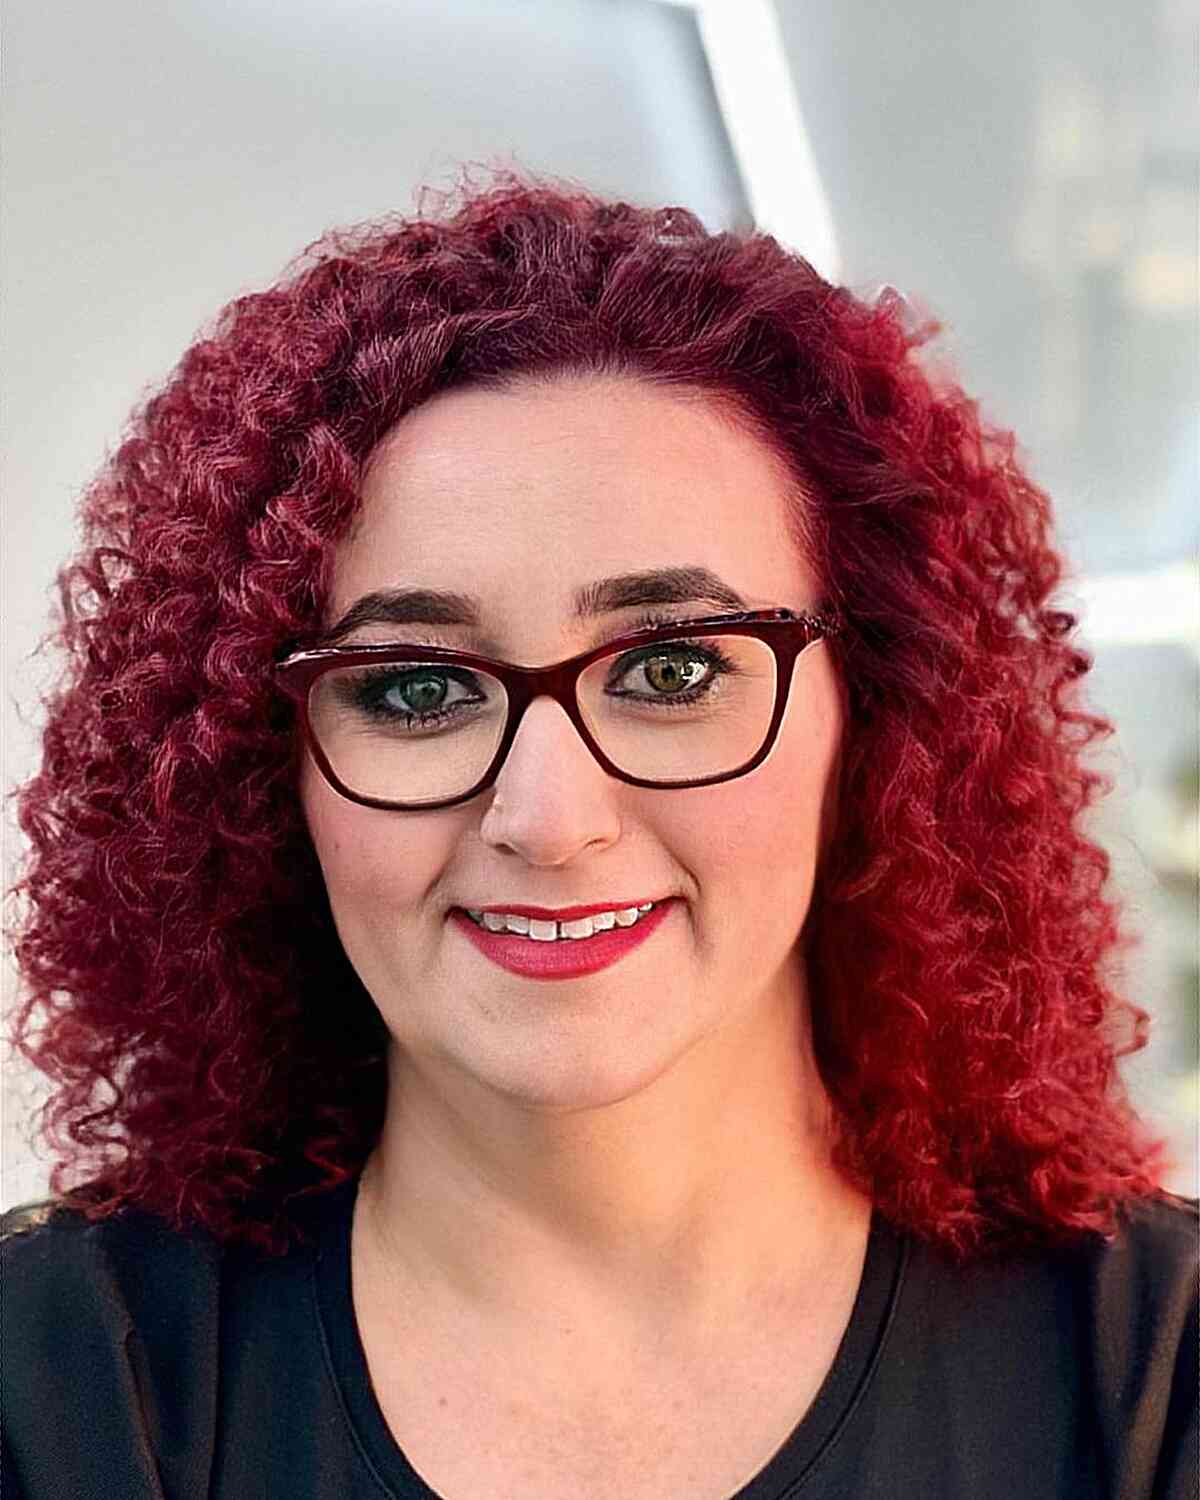 Medium-Length Next Level Red Curls for women with glasses